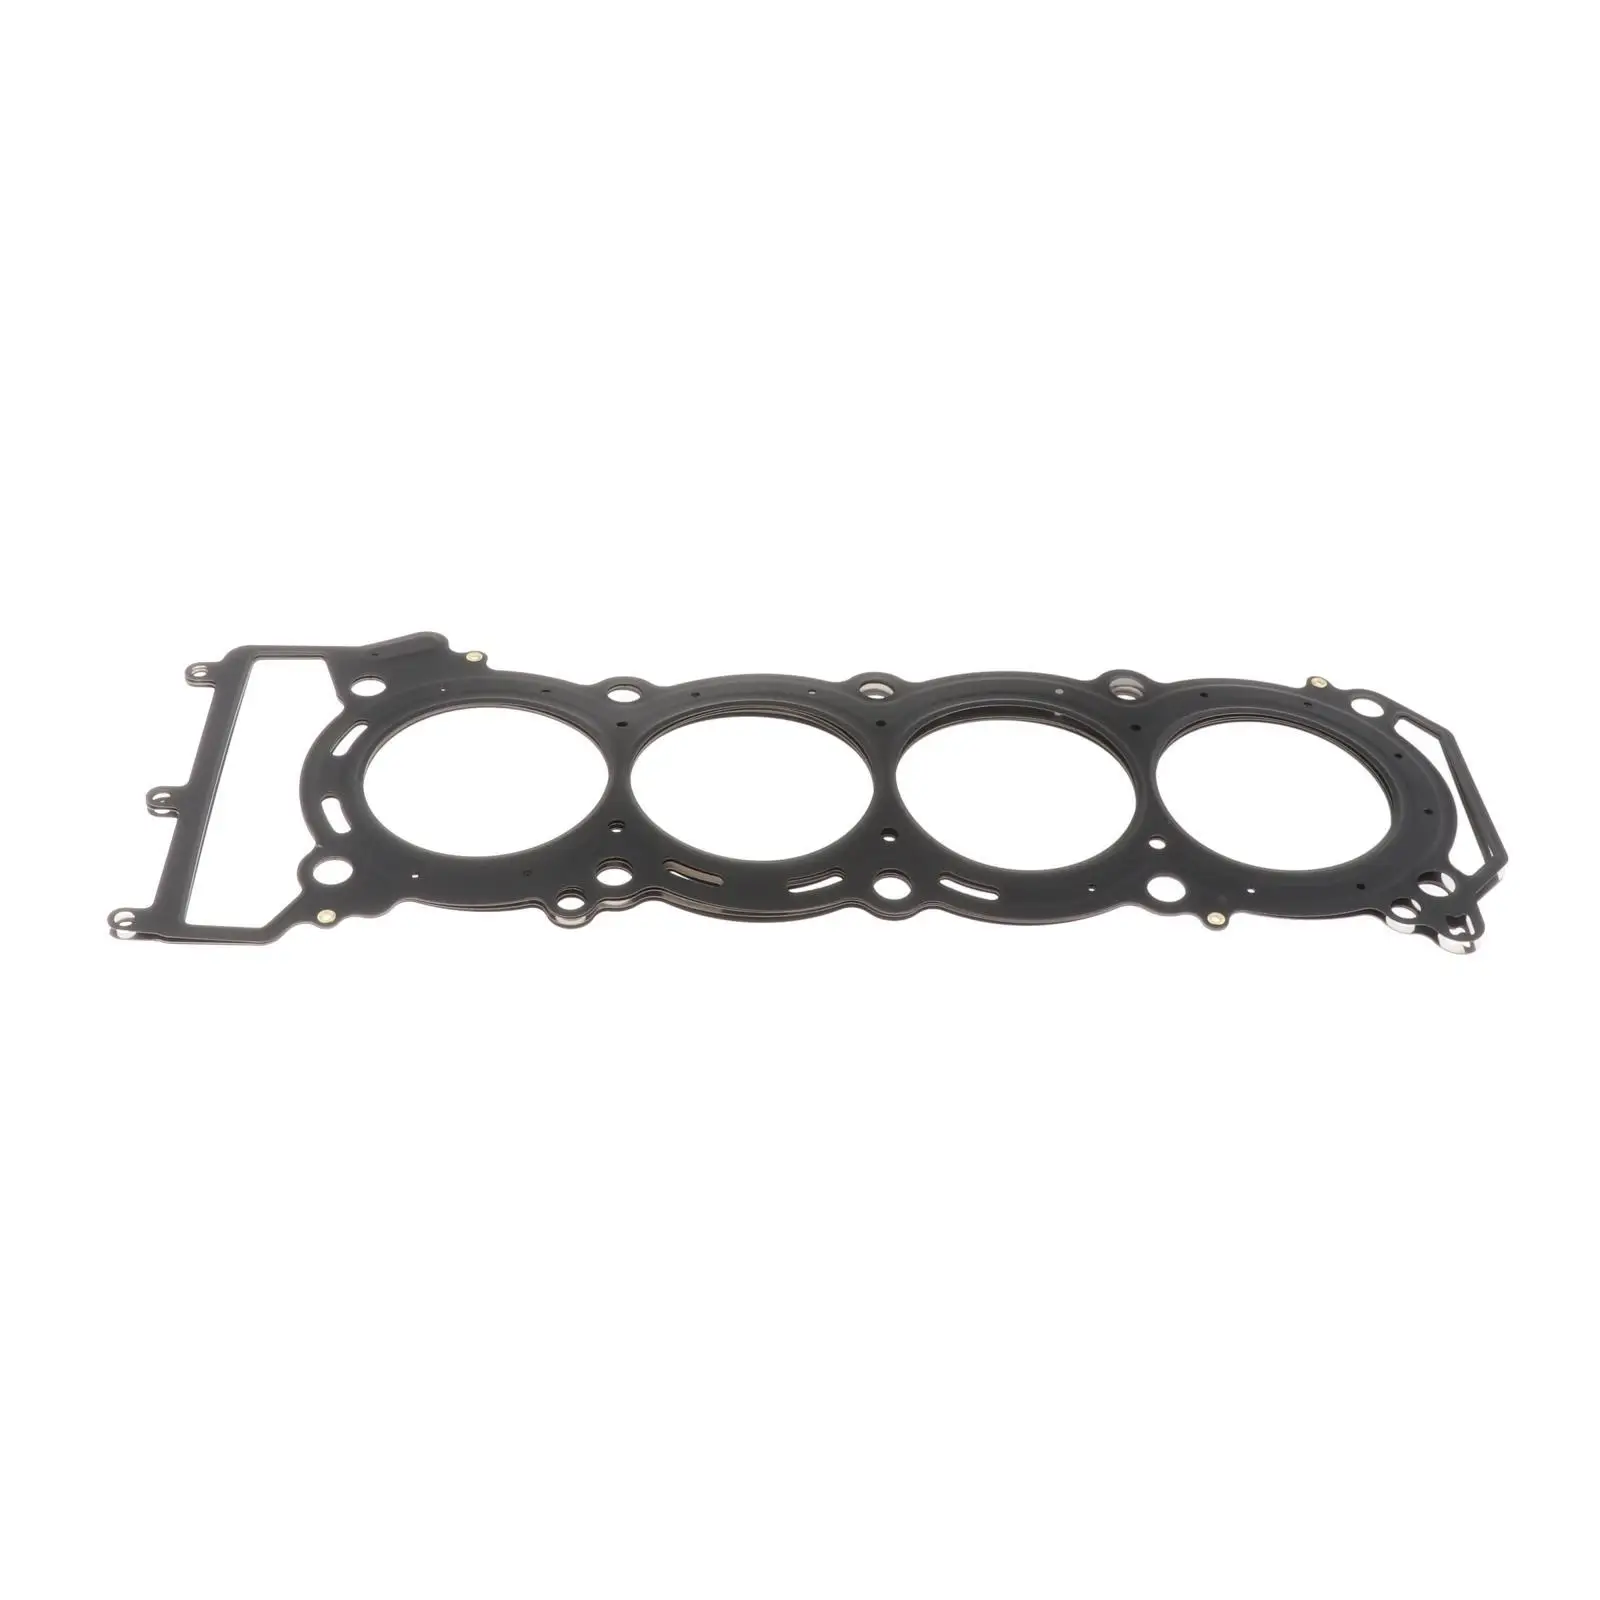 Cylinder Head Gasket Fit for   FX SHO (1.8L) 6BH-11181-00-00 Acc